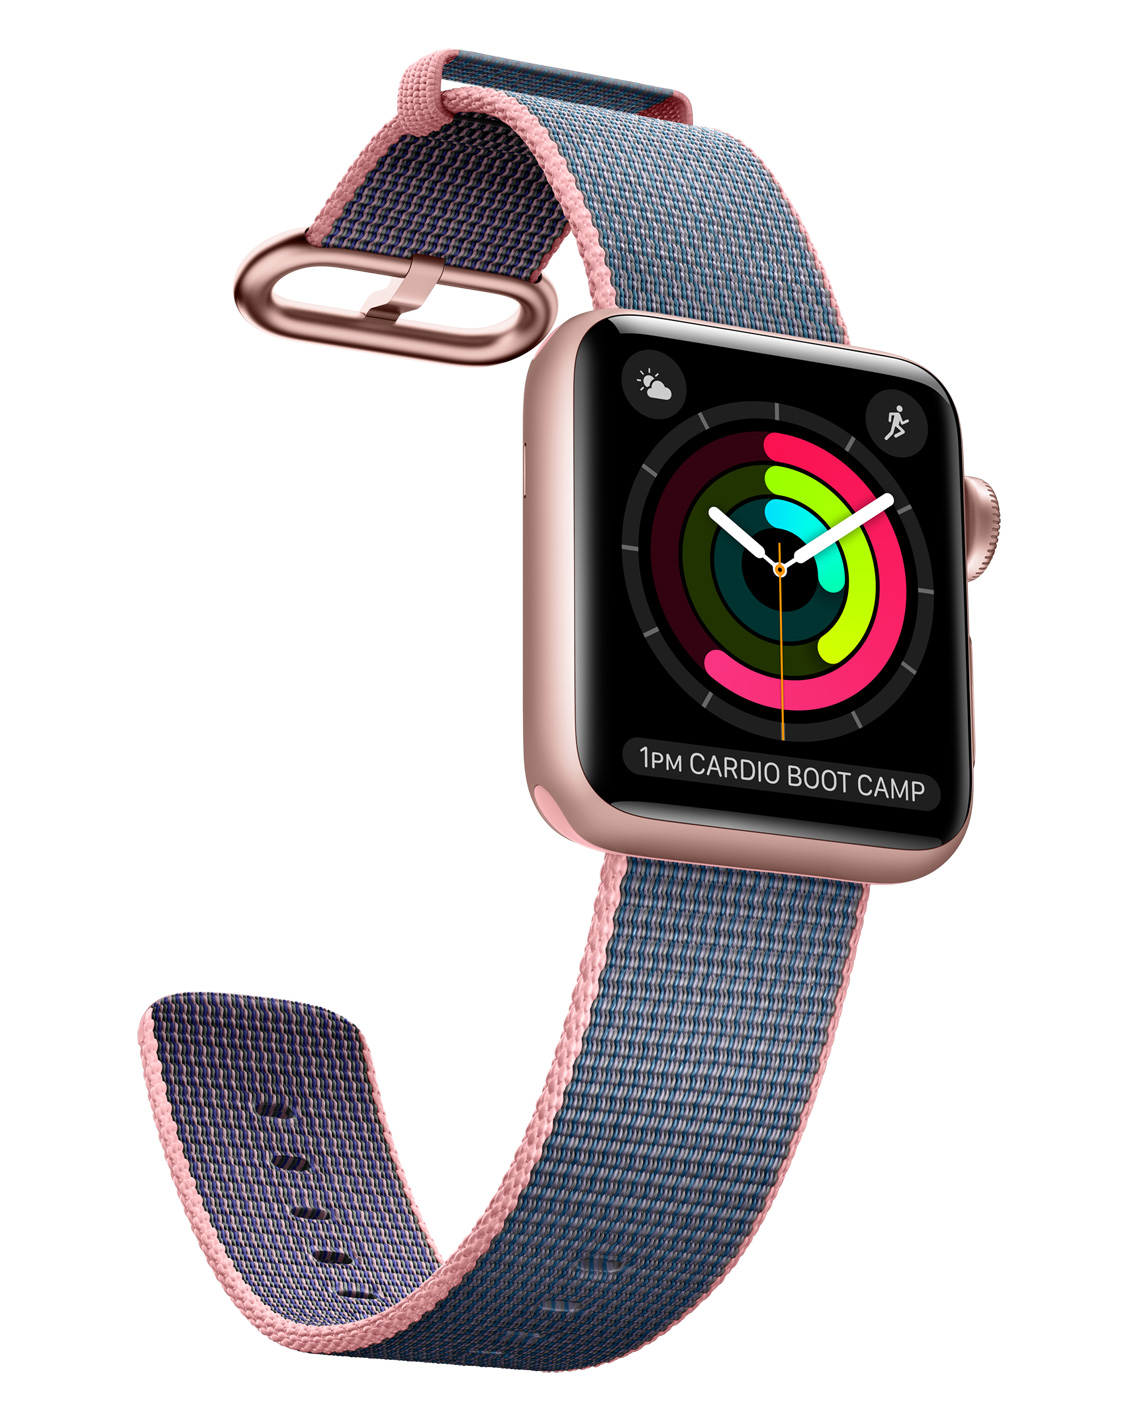 Apple Introduces Apple Watch Series 2, The Ultimate Device for a Healthy Life_1